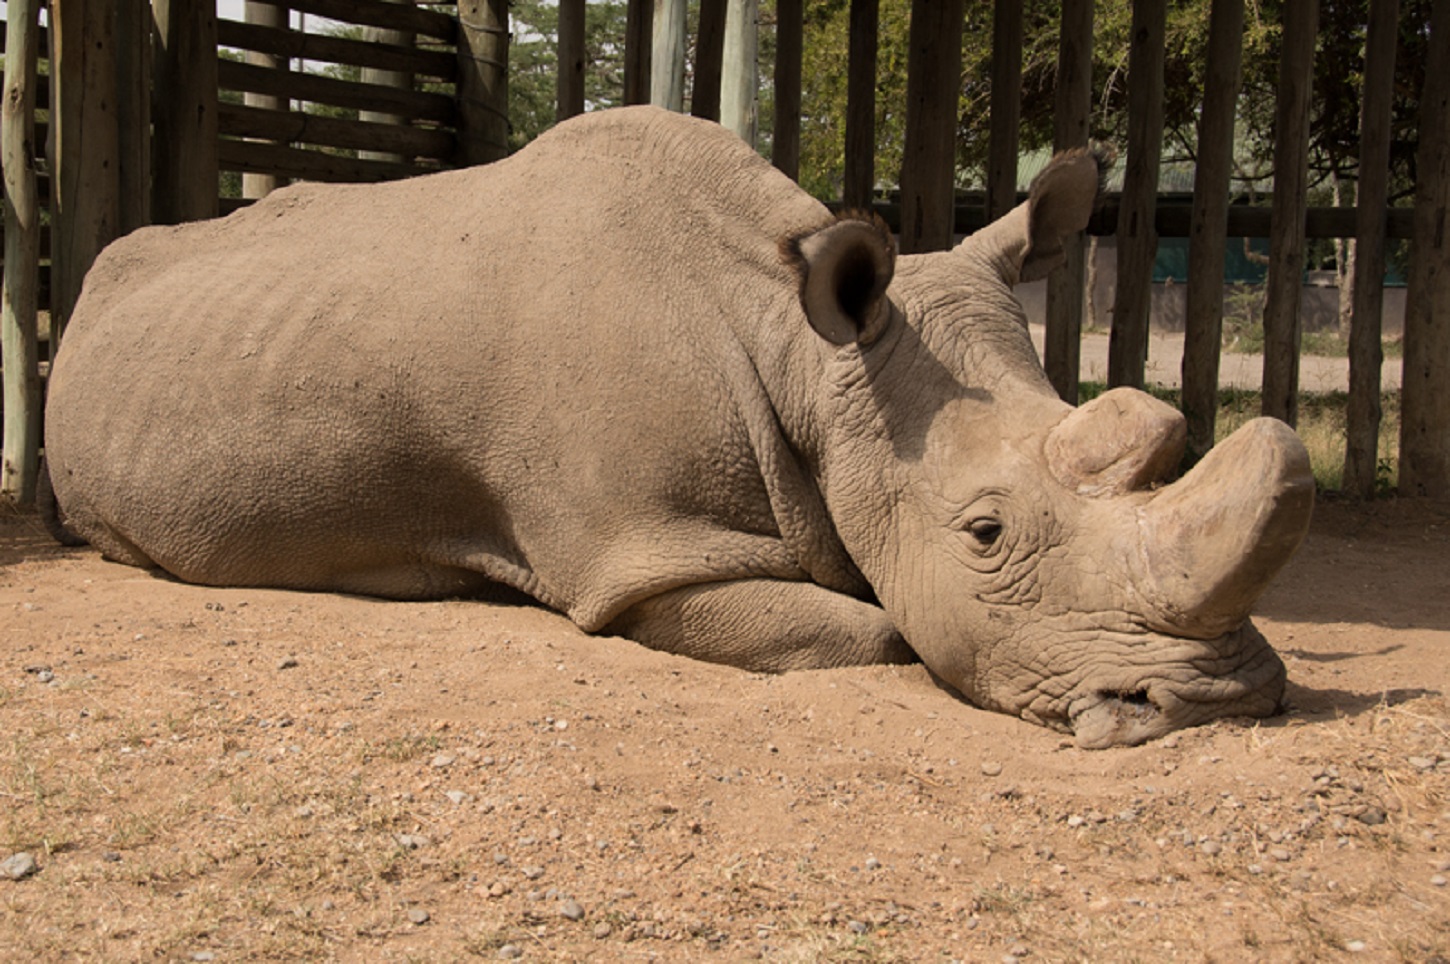 The world's only male northern white rhino, Sudan, has died aged 45 (Ol Pejeta/PA)